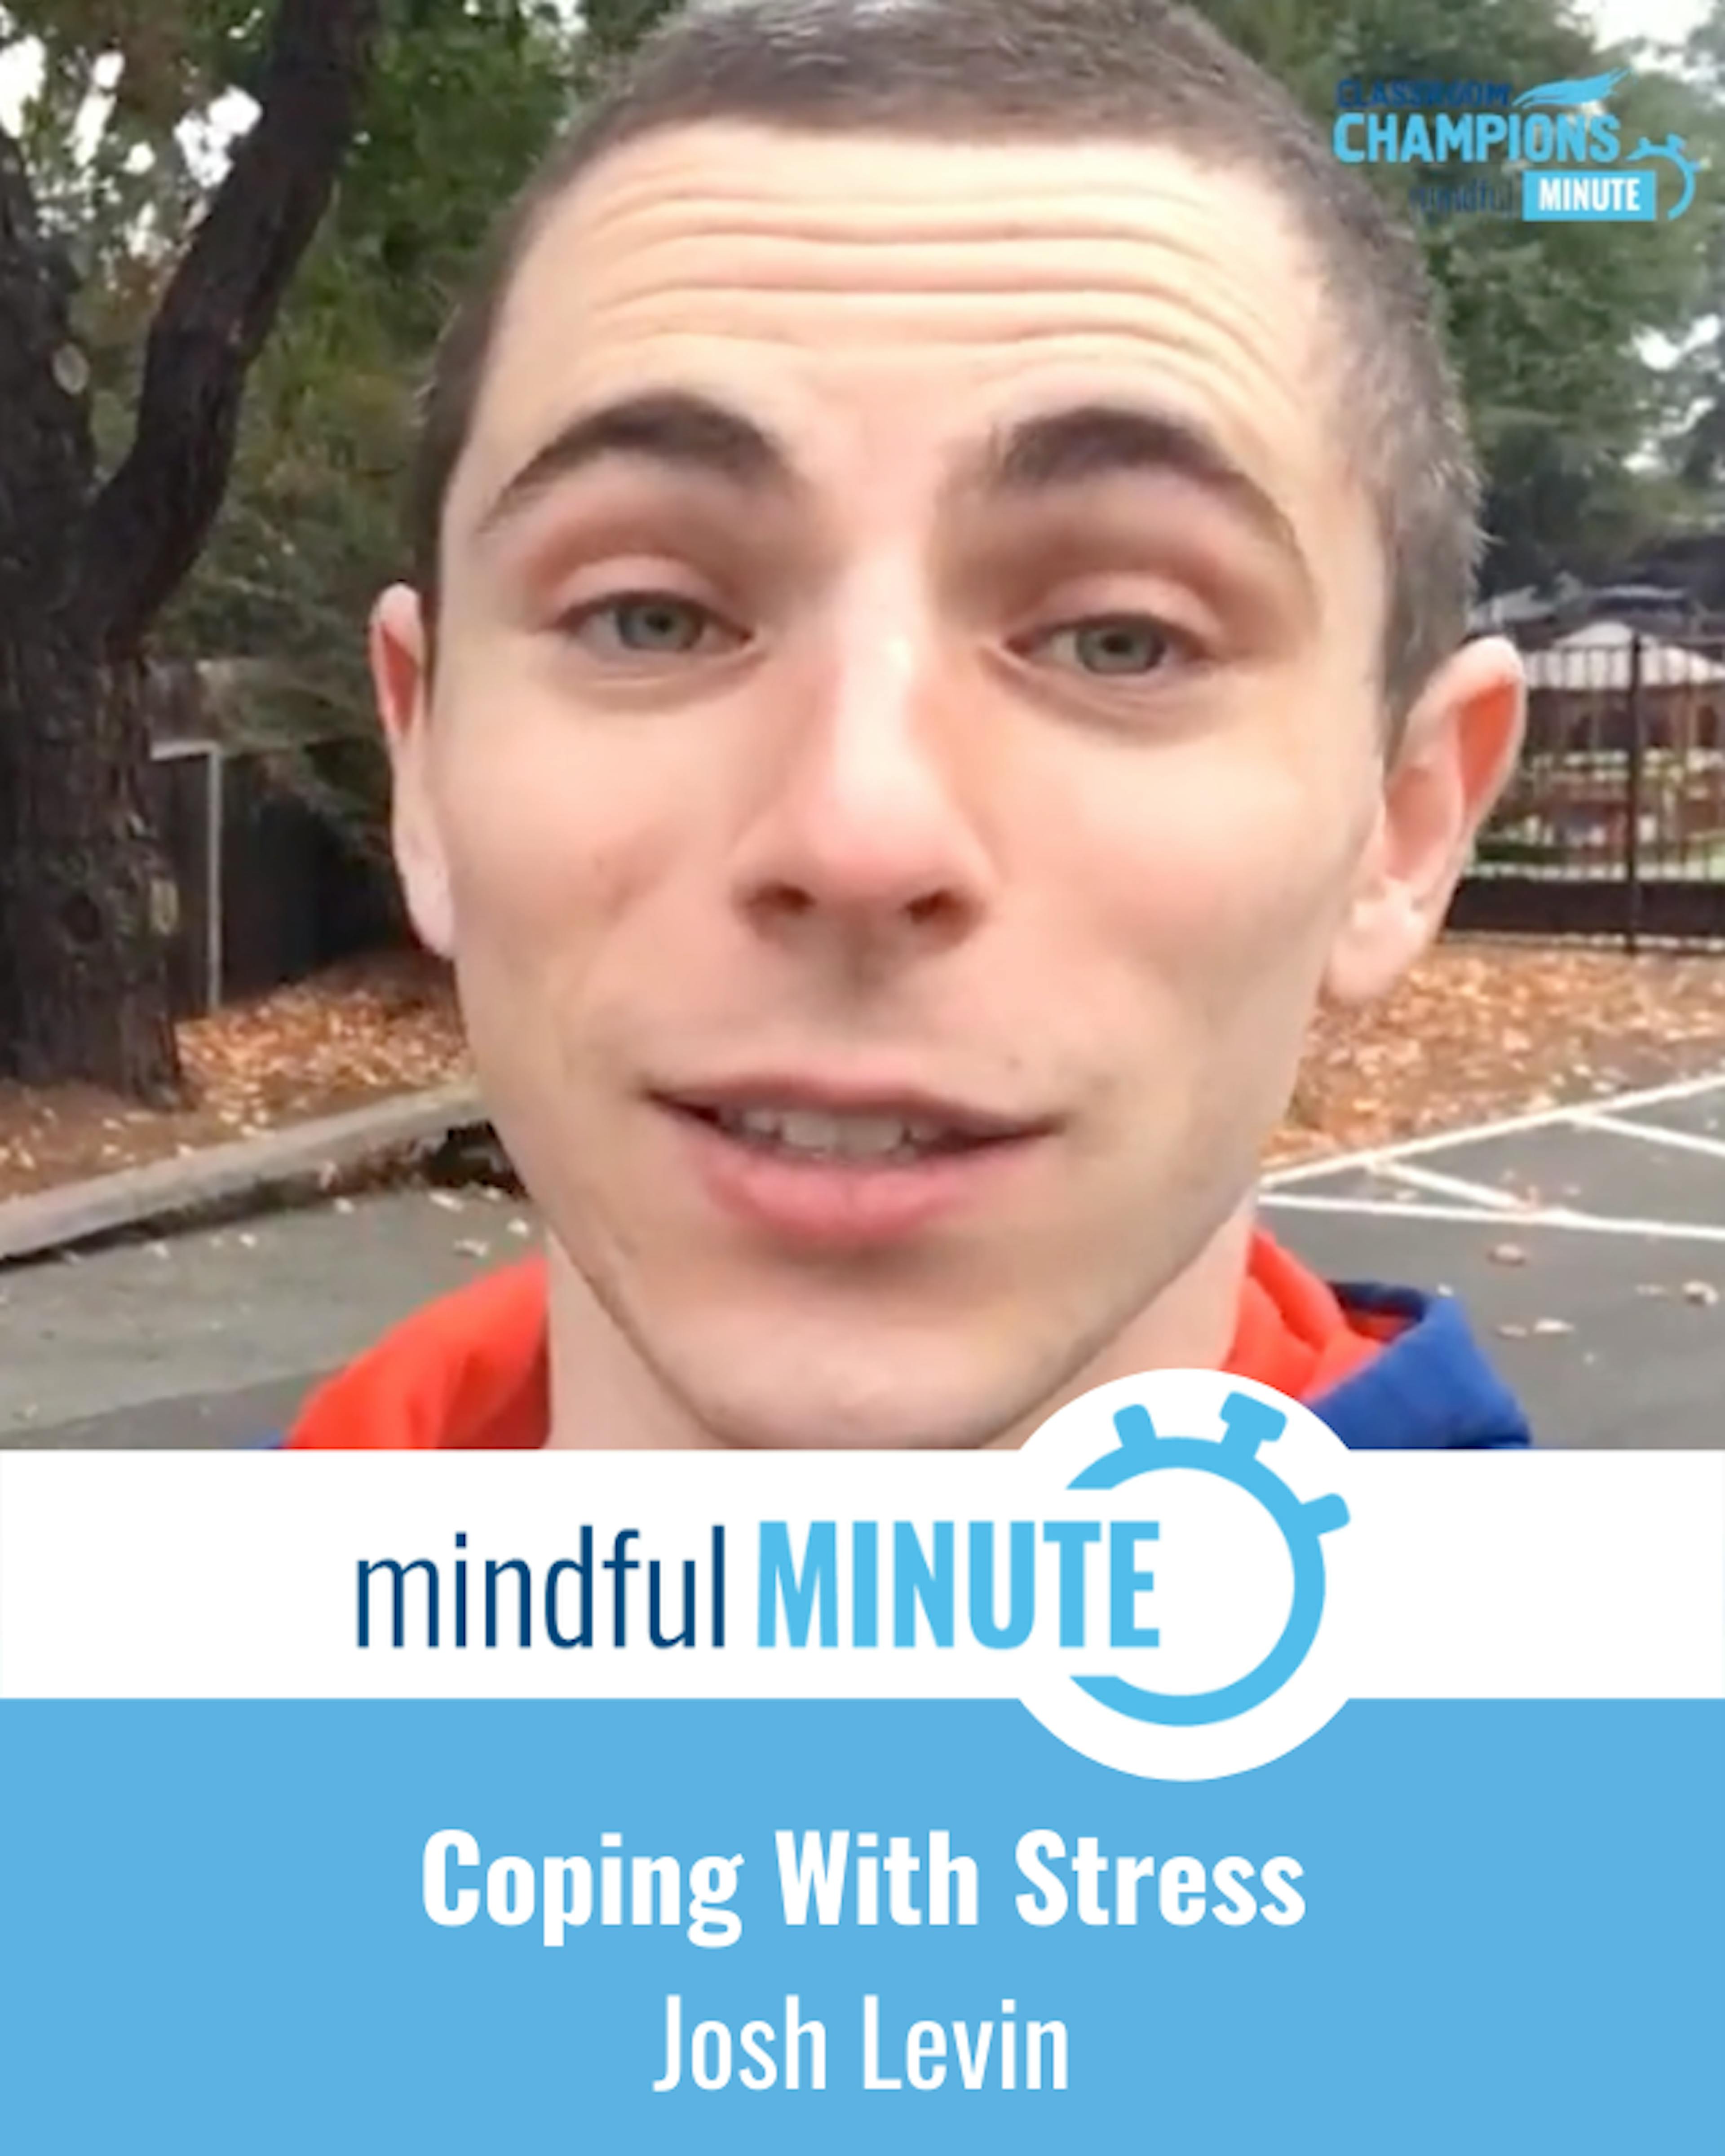 Josh Levin Mindful Minute Video Preview